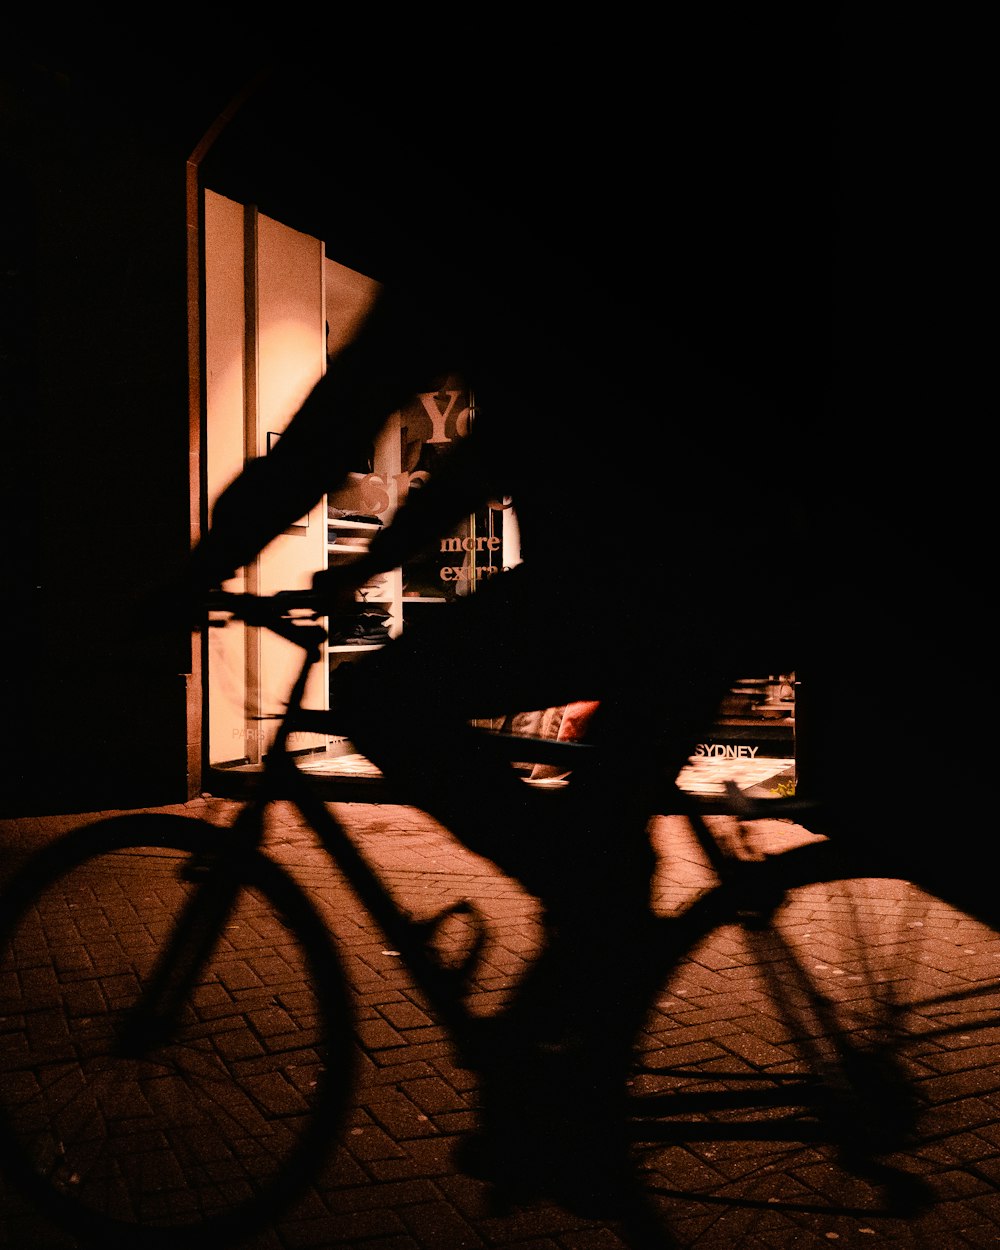 silhouette of bicycle in a dark room